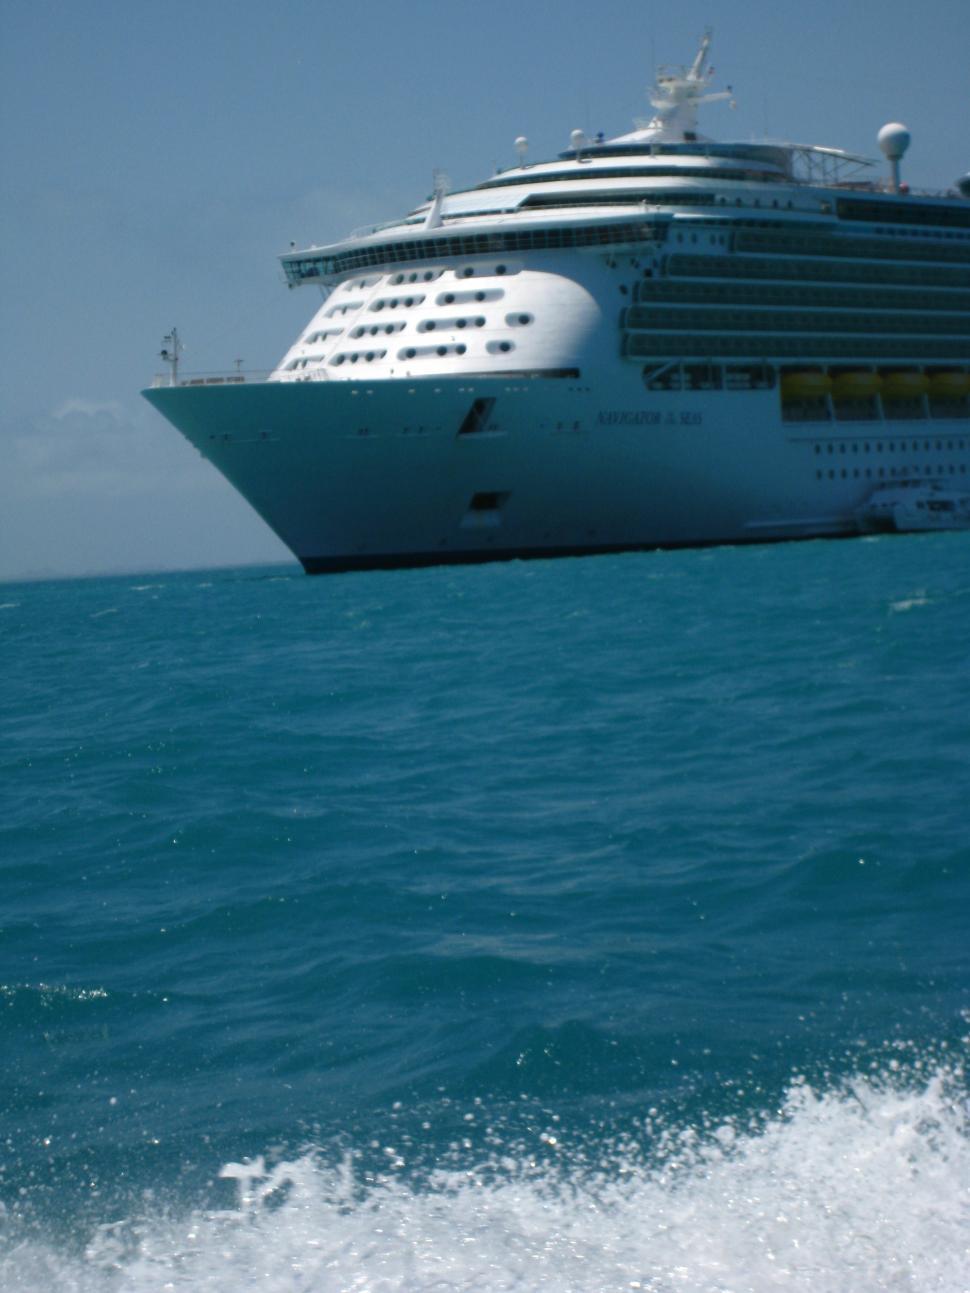 Free Image of Large Cruise Ship Sailing in the Middle of the Ocean 